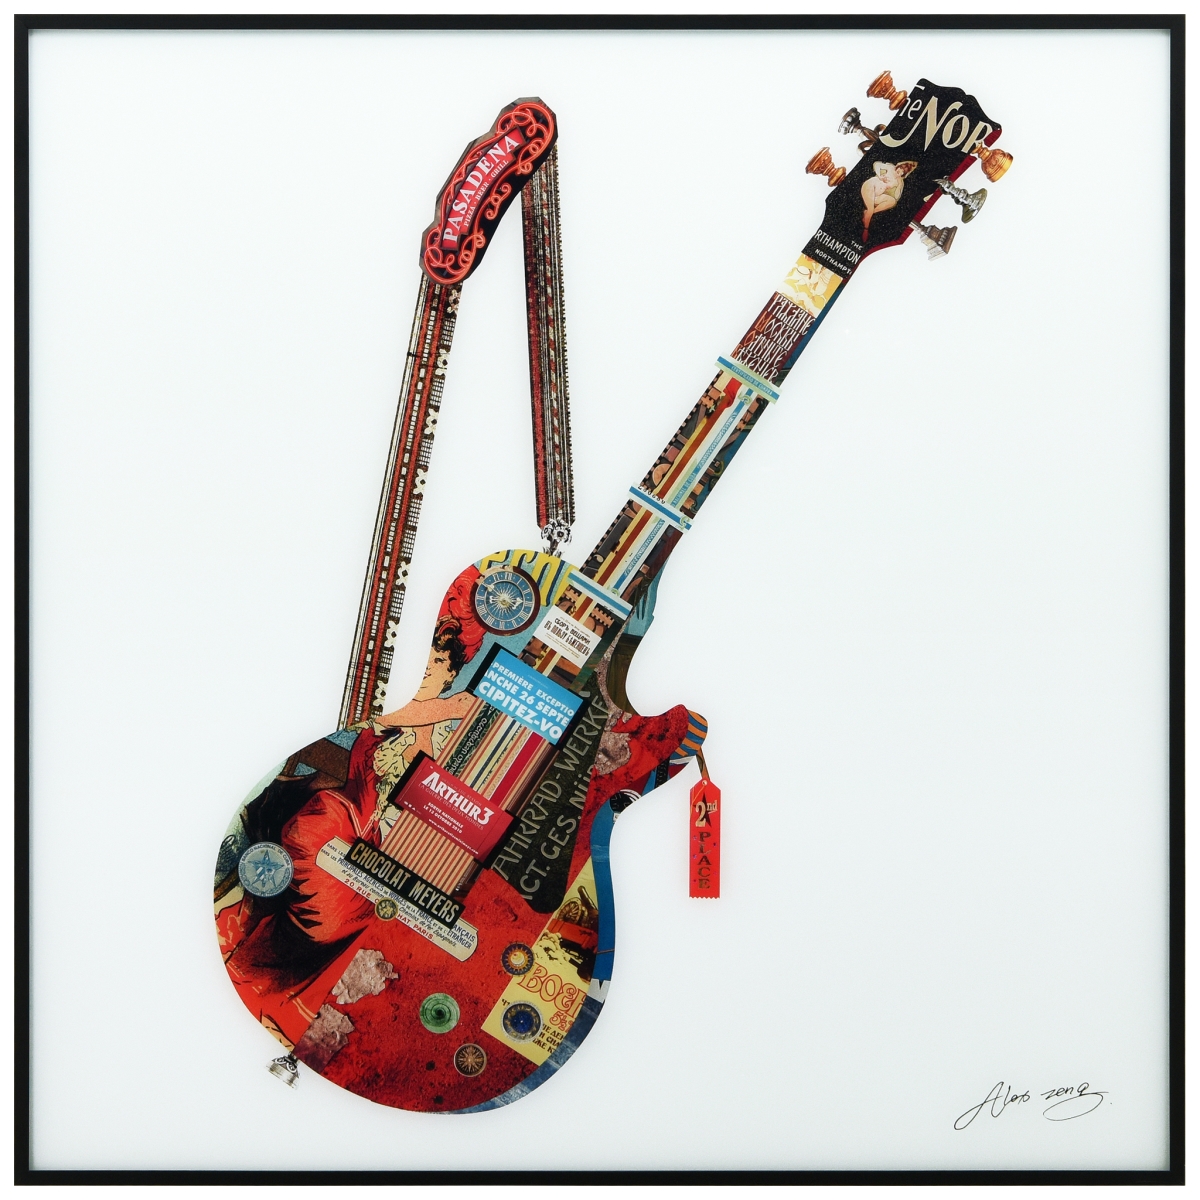 Aagb-az017-2424 24 X 24 In. Electric Guitar Reverse Printed Glass Wall Art With Black Anodized Aluminum Frame